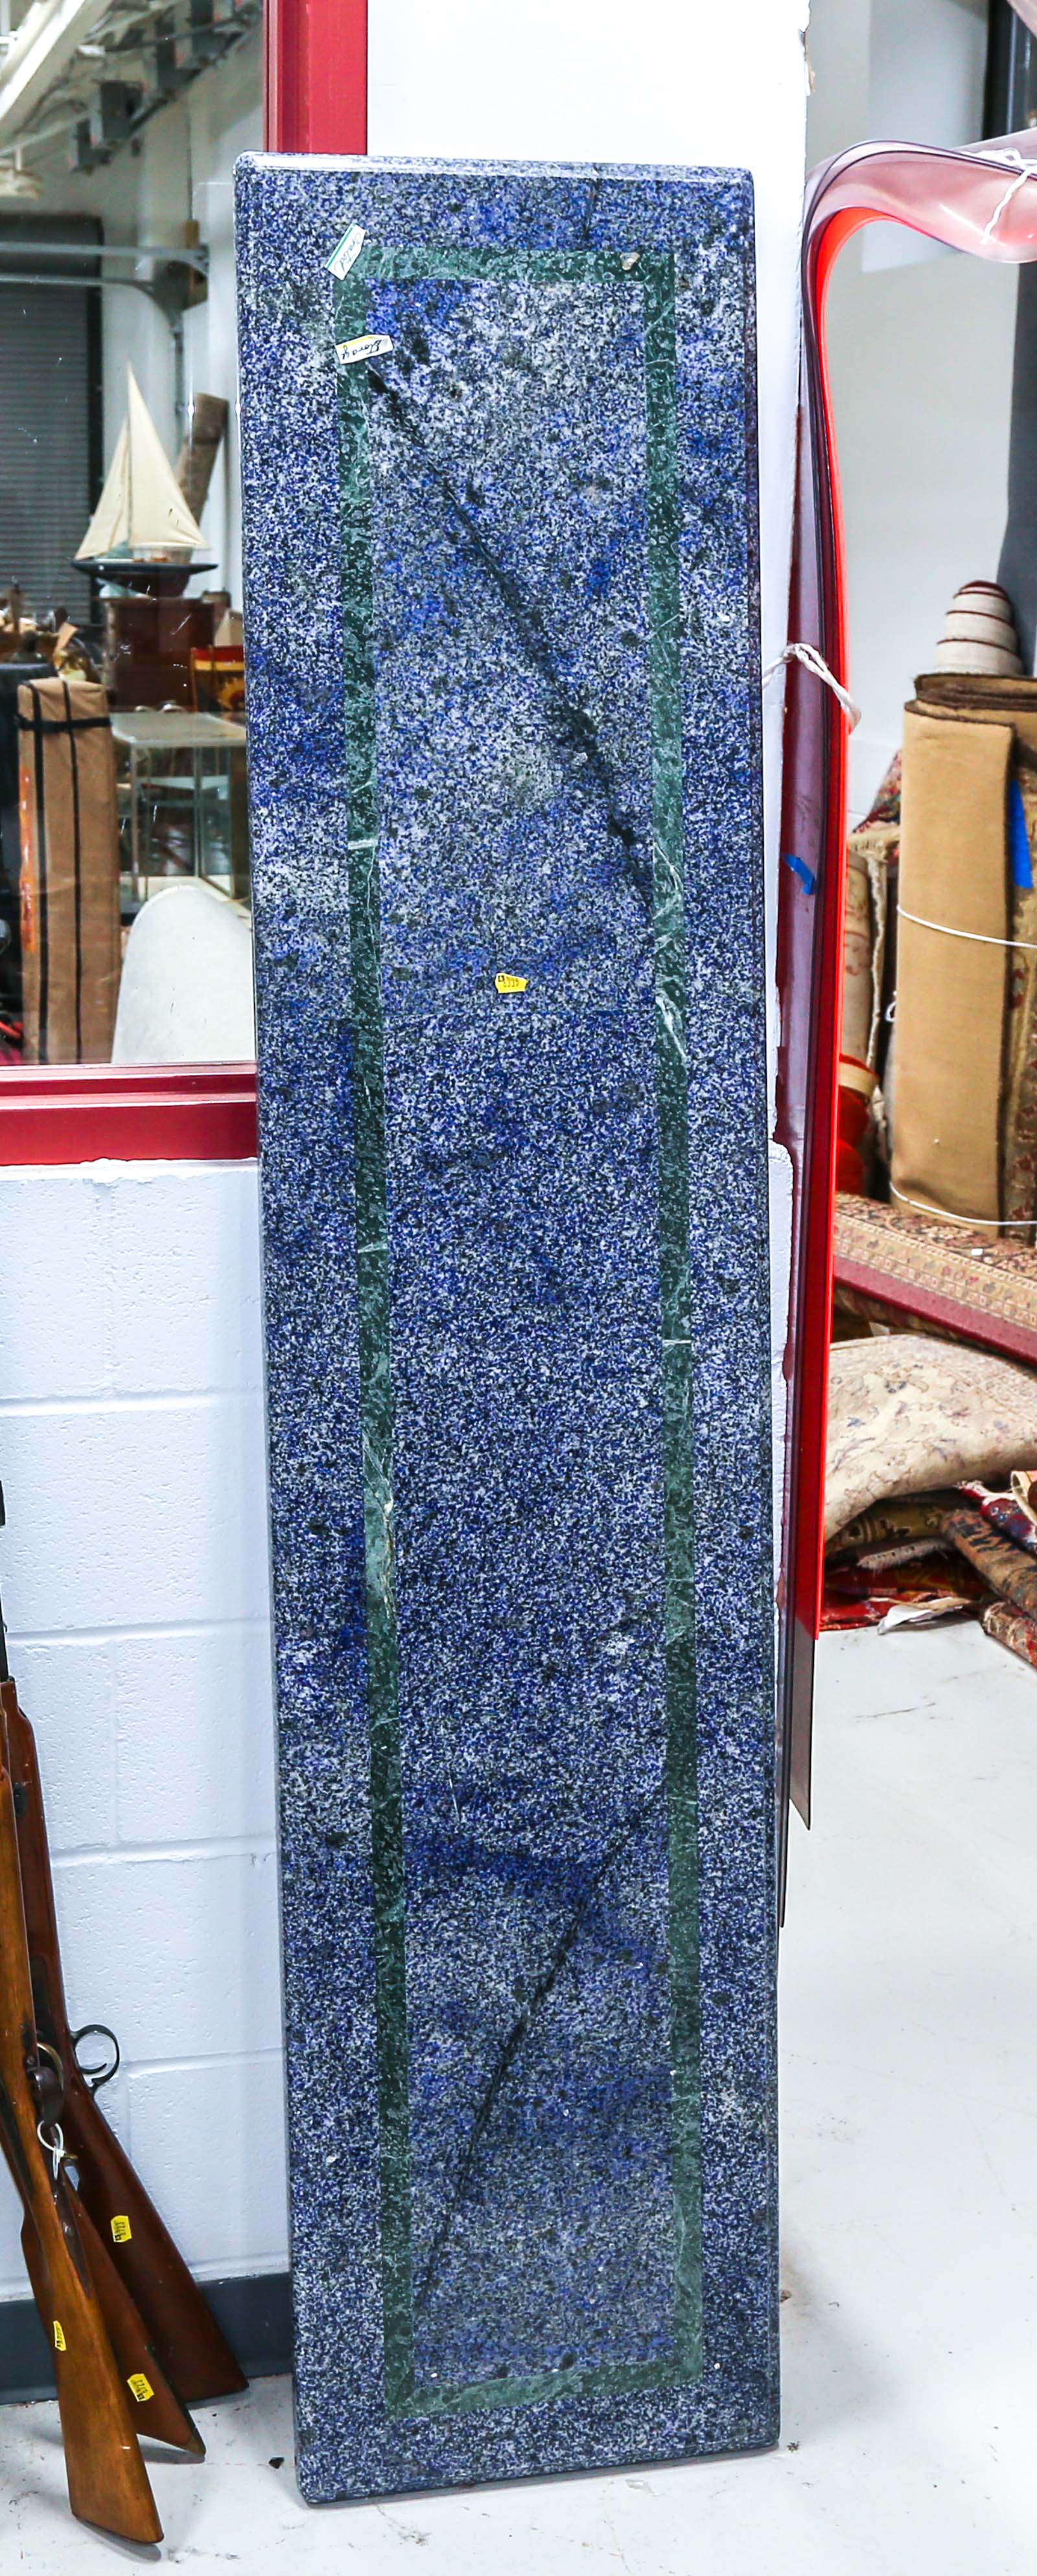 LARGE INLAID STONE TABLE TOP Later 2e9310